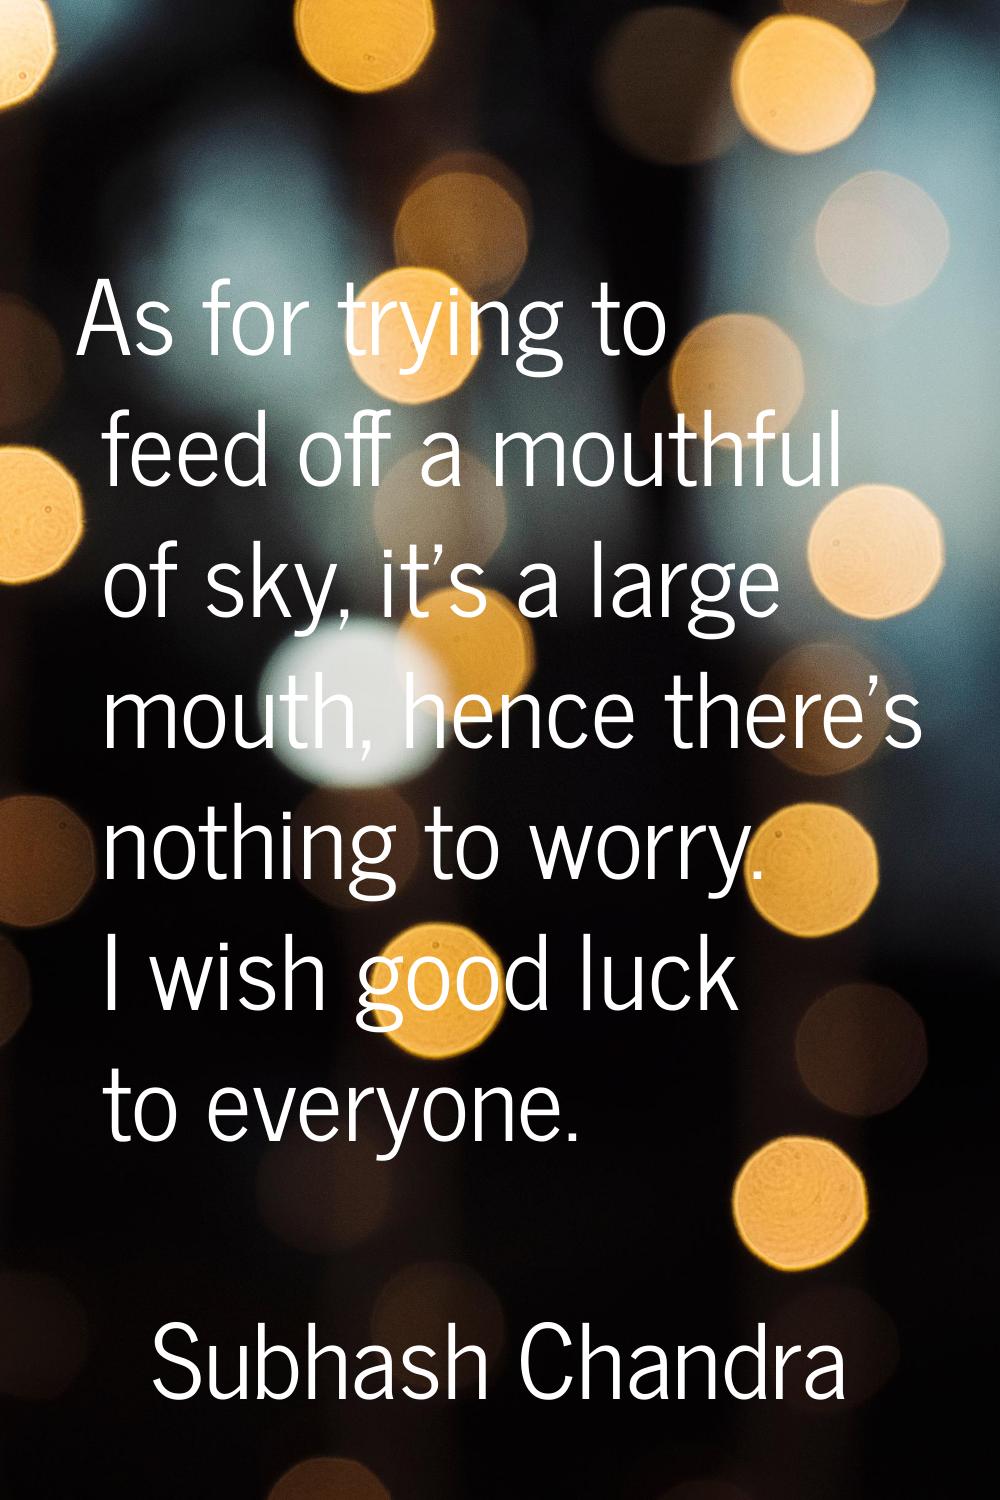 As for trying to feed off a mouthful of sky, it's a large mouth, hence there's nothing to worry. I 